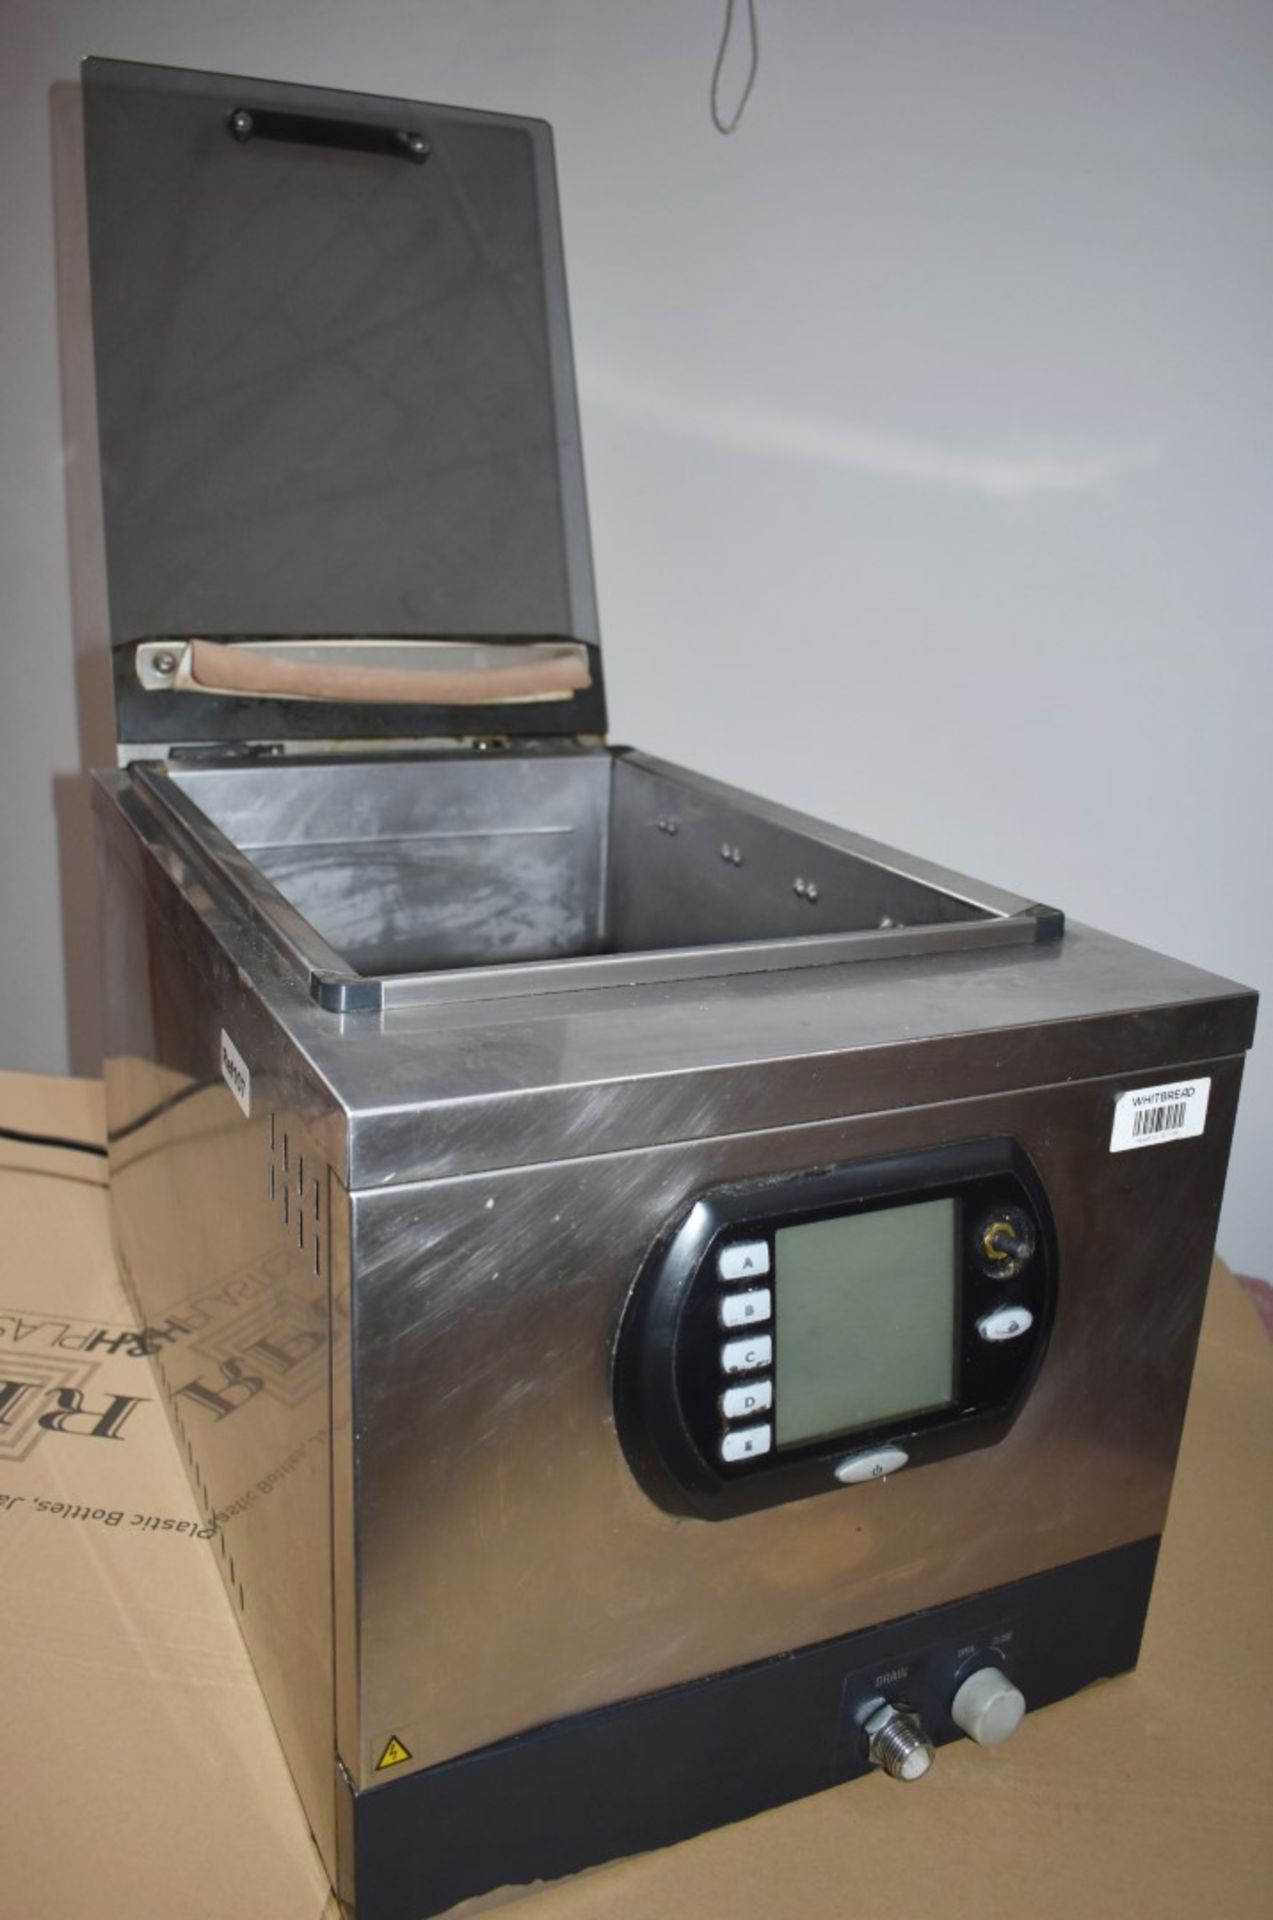 1 x Instanta SV38 Sous Vide Digital Water Bath - CL232 - Ref107 - Stainless Steel Finish - Location: - Image 3 of 5